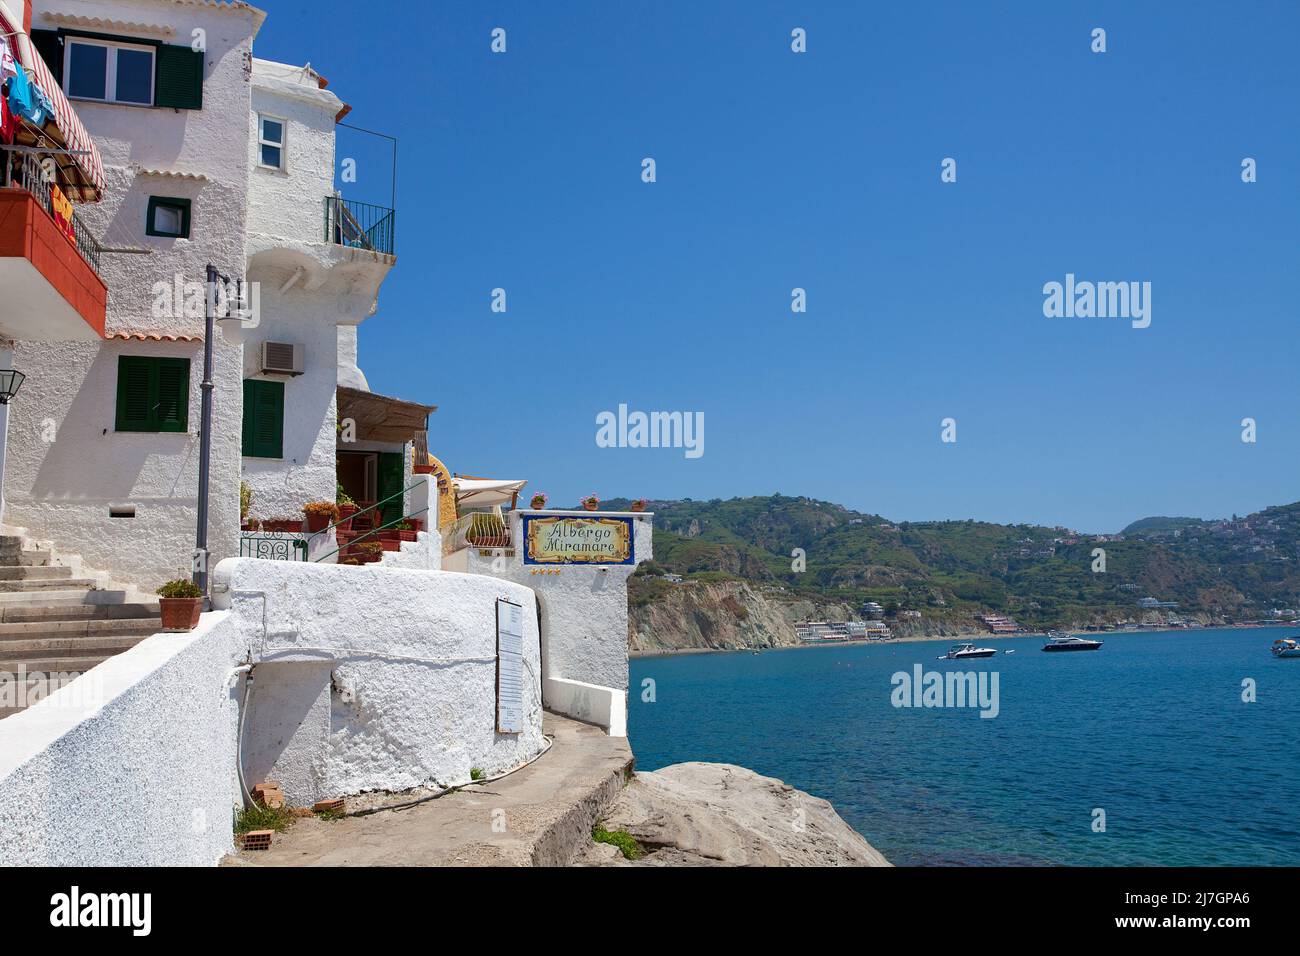 Traditional white houses in the picturesque fishing village Sant' Angelo, Ischia island, Gulf of Neapel, Italy, Mediterranean Sea, Europe Stock Photo